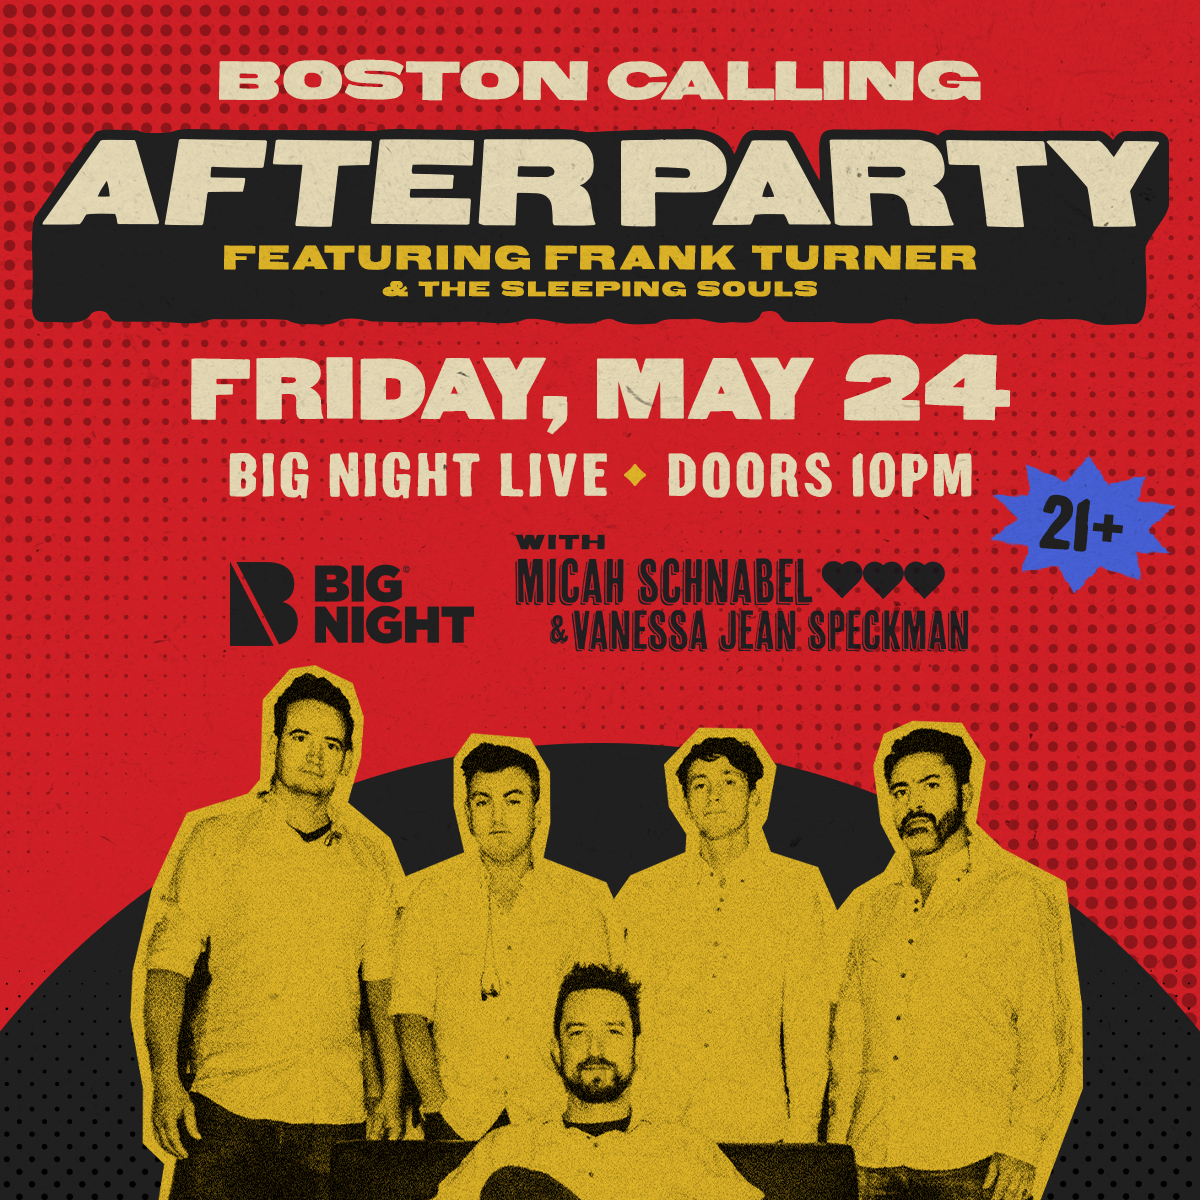 JUST IN 🔥 The party doesn't stop after @bostoncalling! @frankturner & @SleepingSouls take over #BigNightLive on Friday, May 24th w/ support from @micahtwocow & @vjspeckman. Tickets go on sale tomorrow at 10 AM. ticketmaster.com/event/01006097…